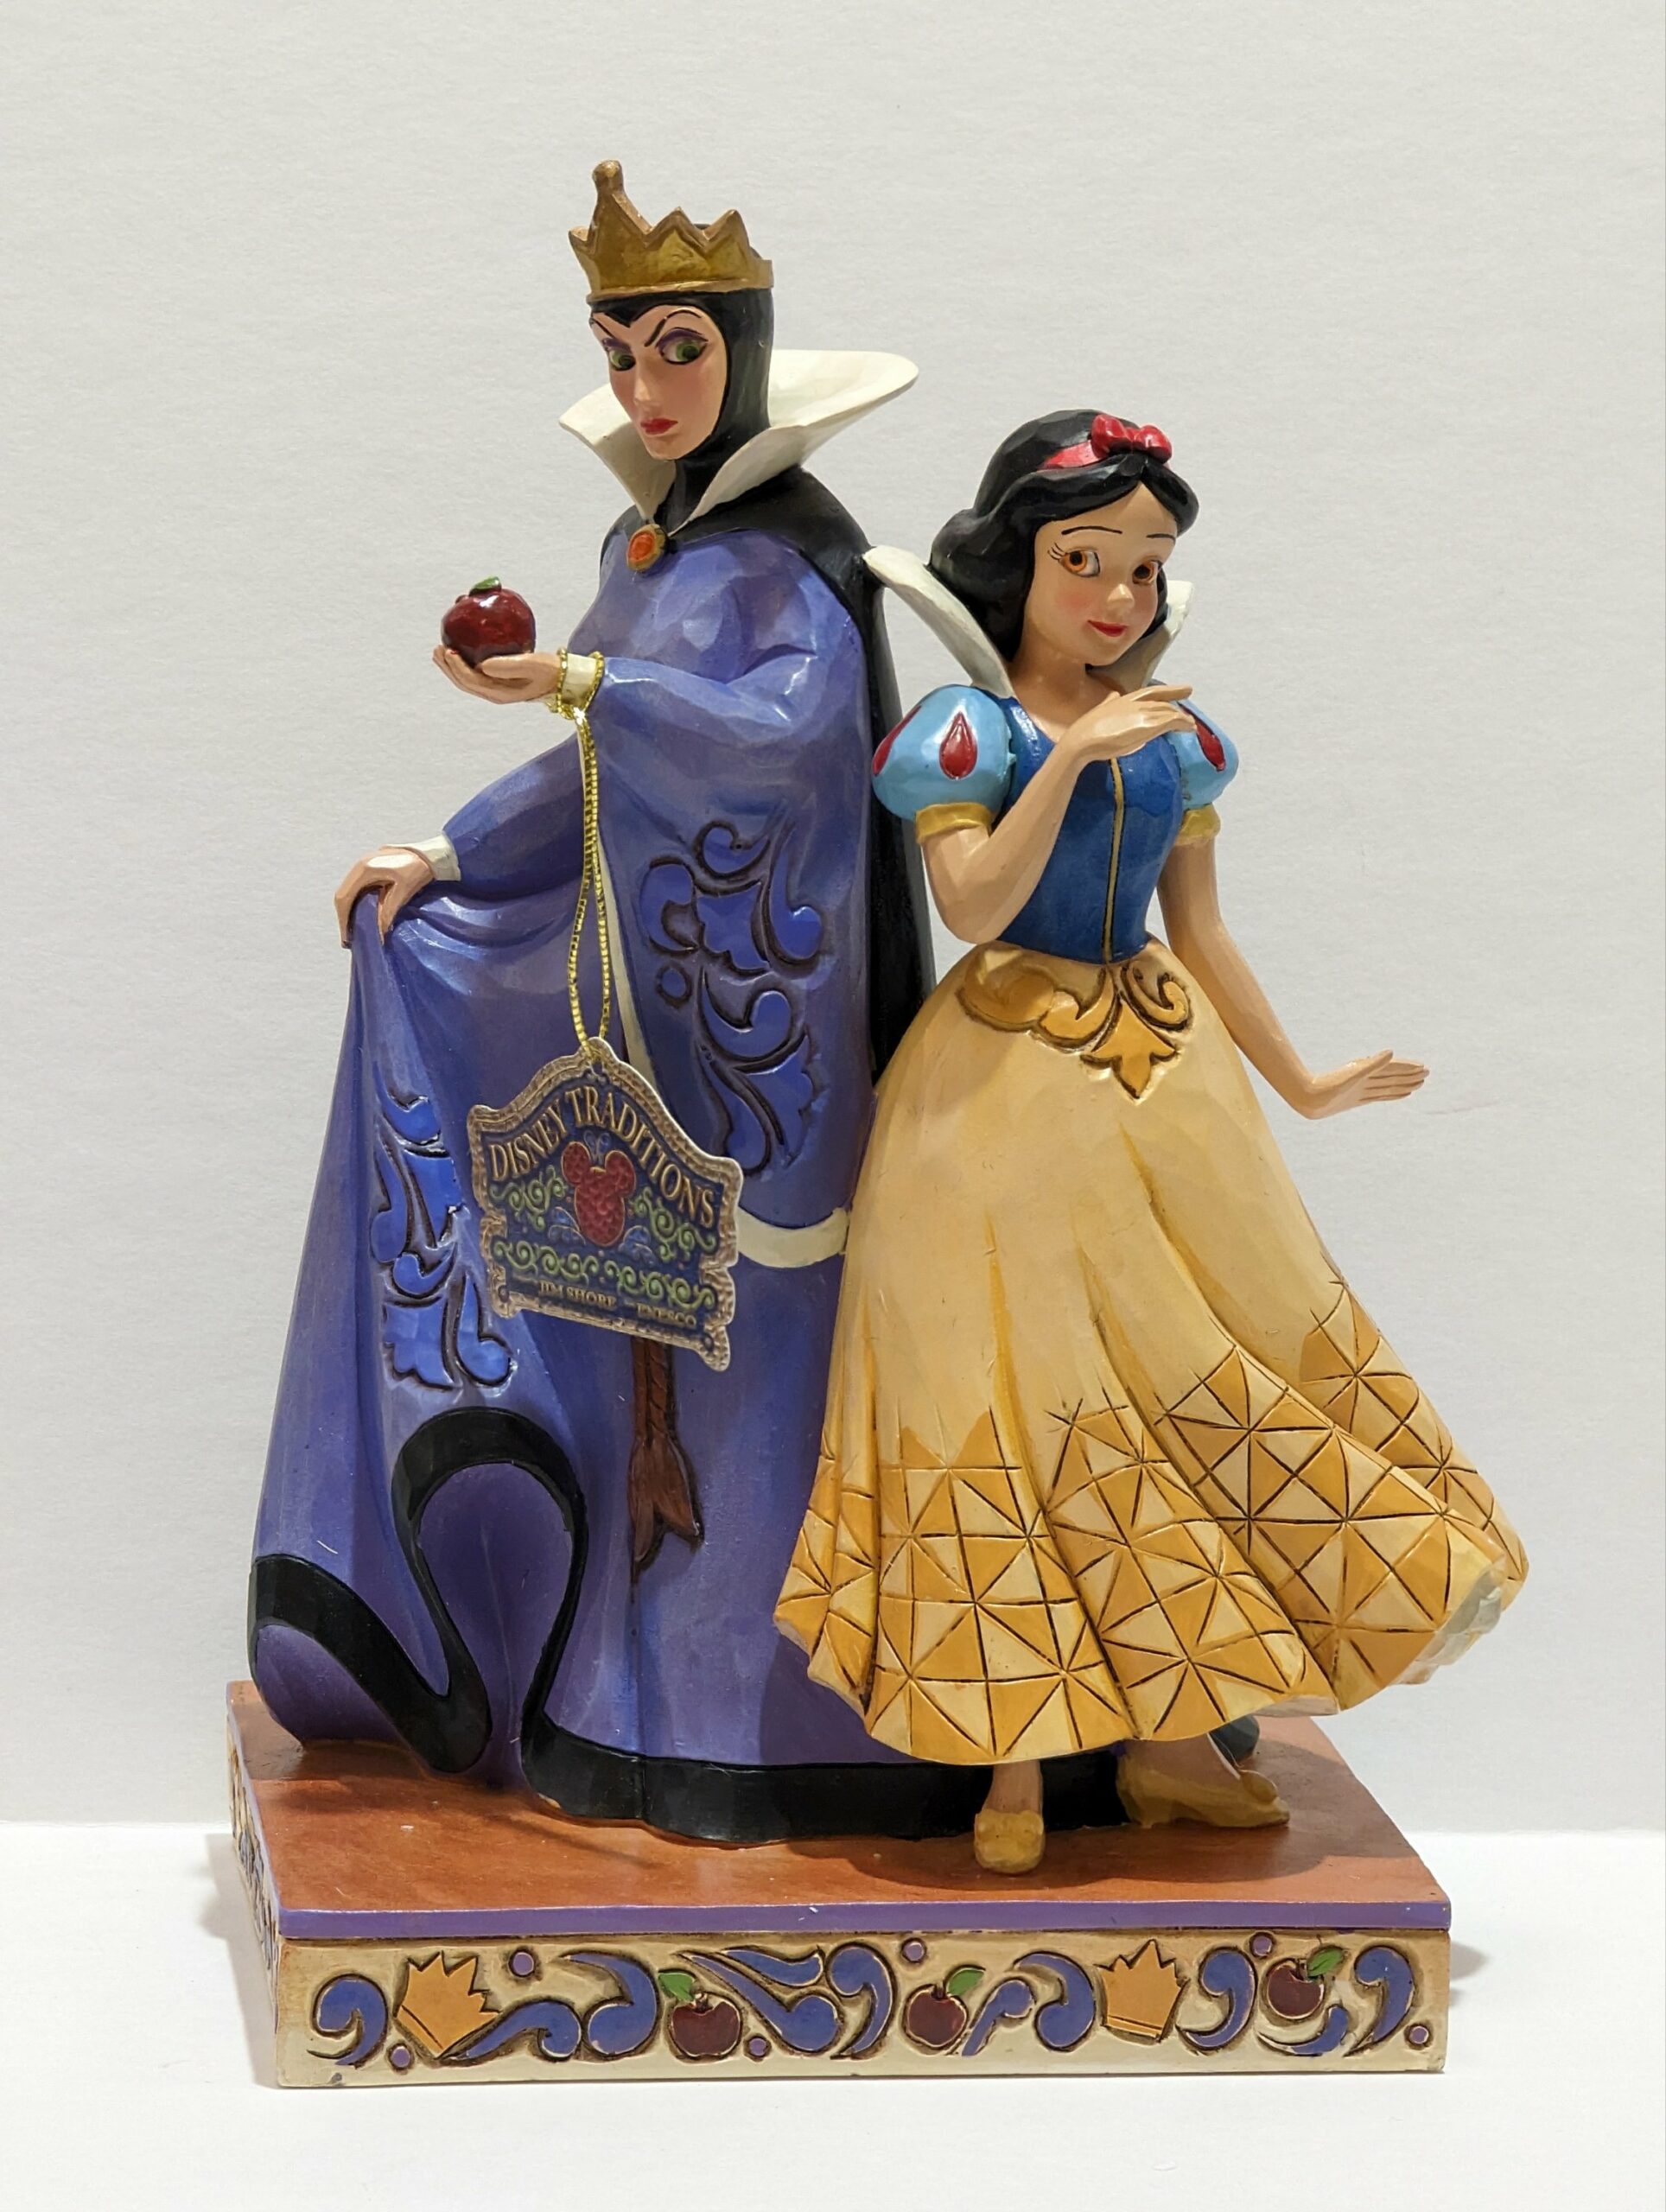 Enesco Disney Traditions By Jim Shore “Evil and Innocence” Snow